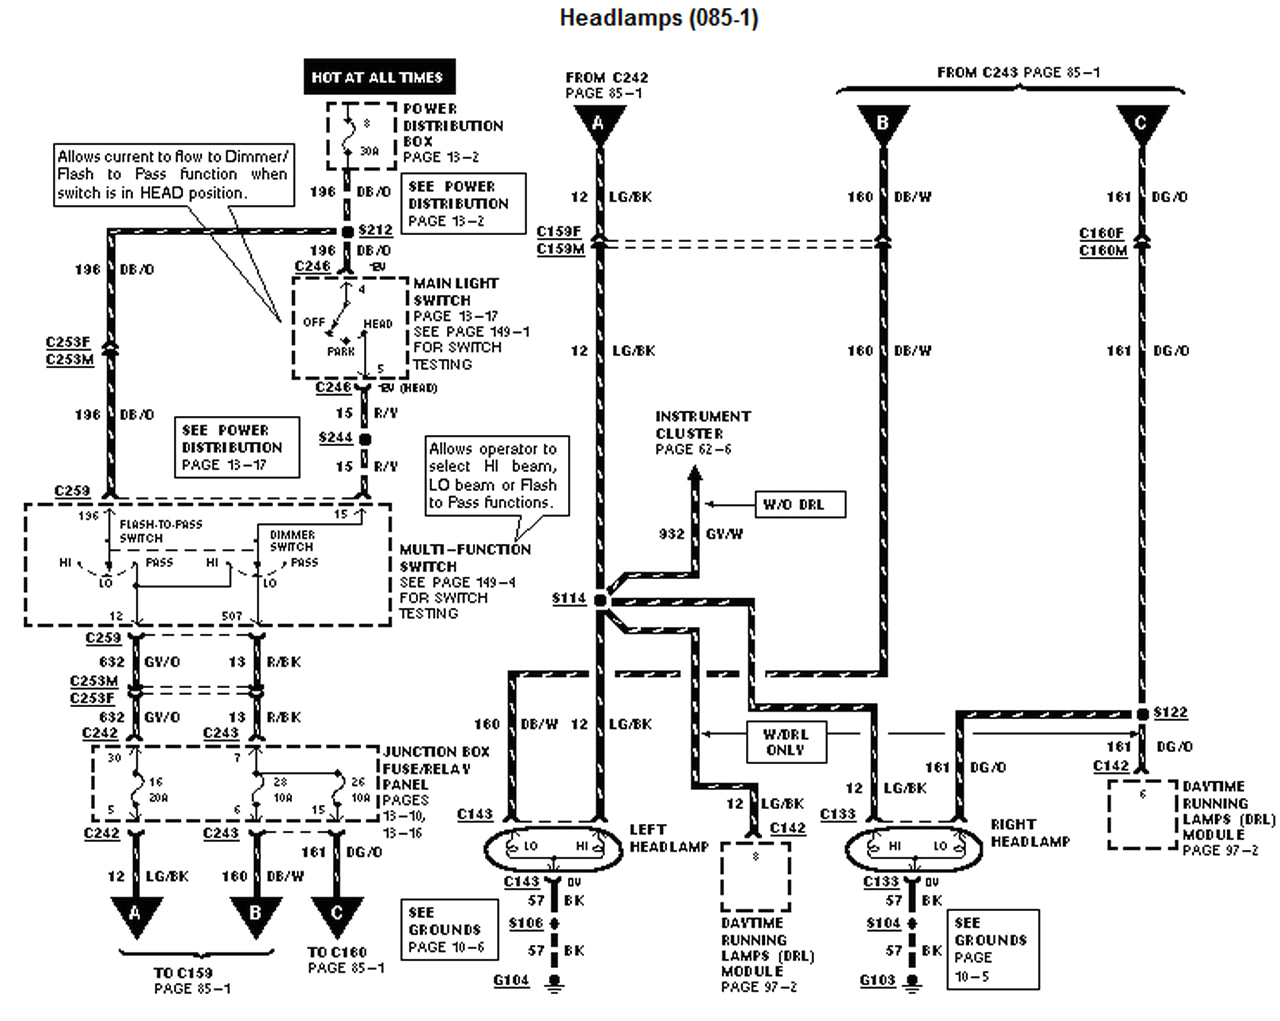 1990 ford F250 Starter solenoid Wiring Diagram Wrg 5624 ford F150 Wiring Chart